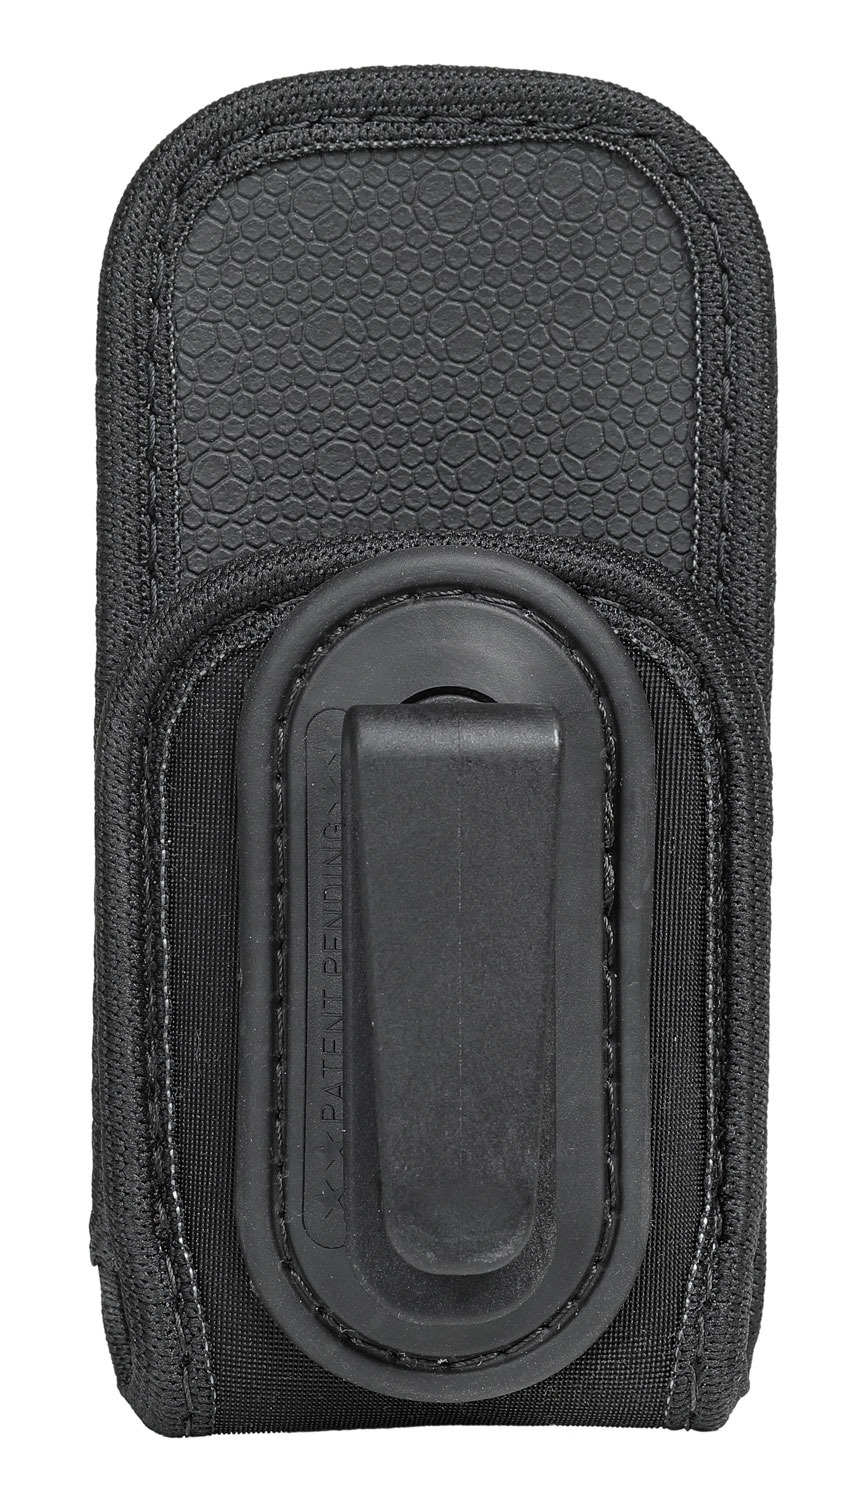 Alien Gear Holsters GMDSM Grip Tuck Mag Carrier IWB Style made of Neoprene with Black Finish & Belt Clip compatible with Medium Length Double Stack Mags (Medium Length = 4.62